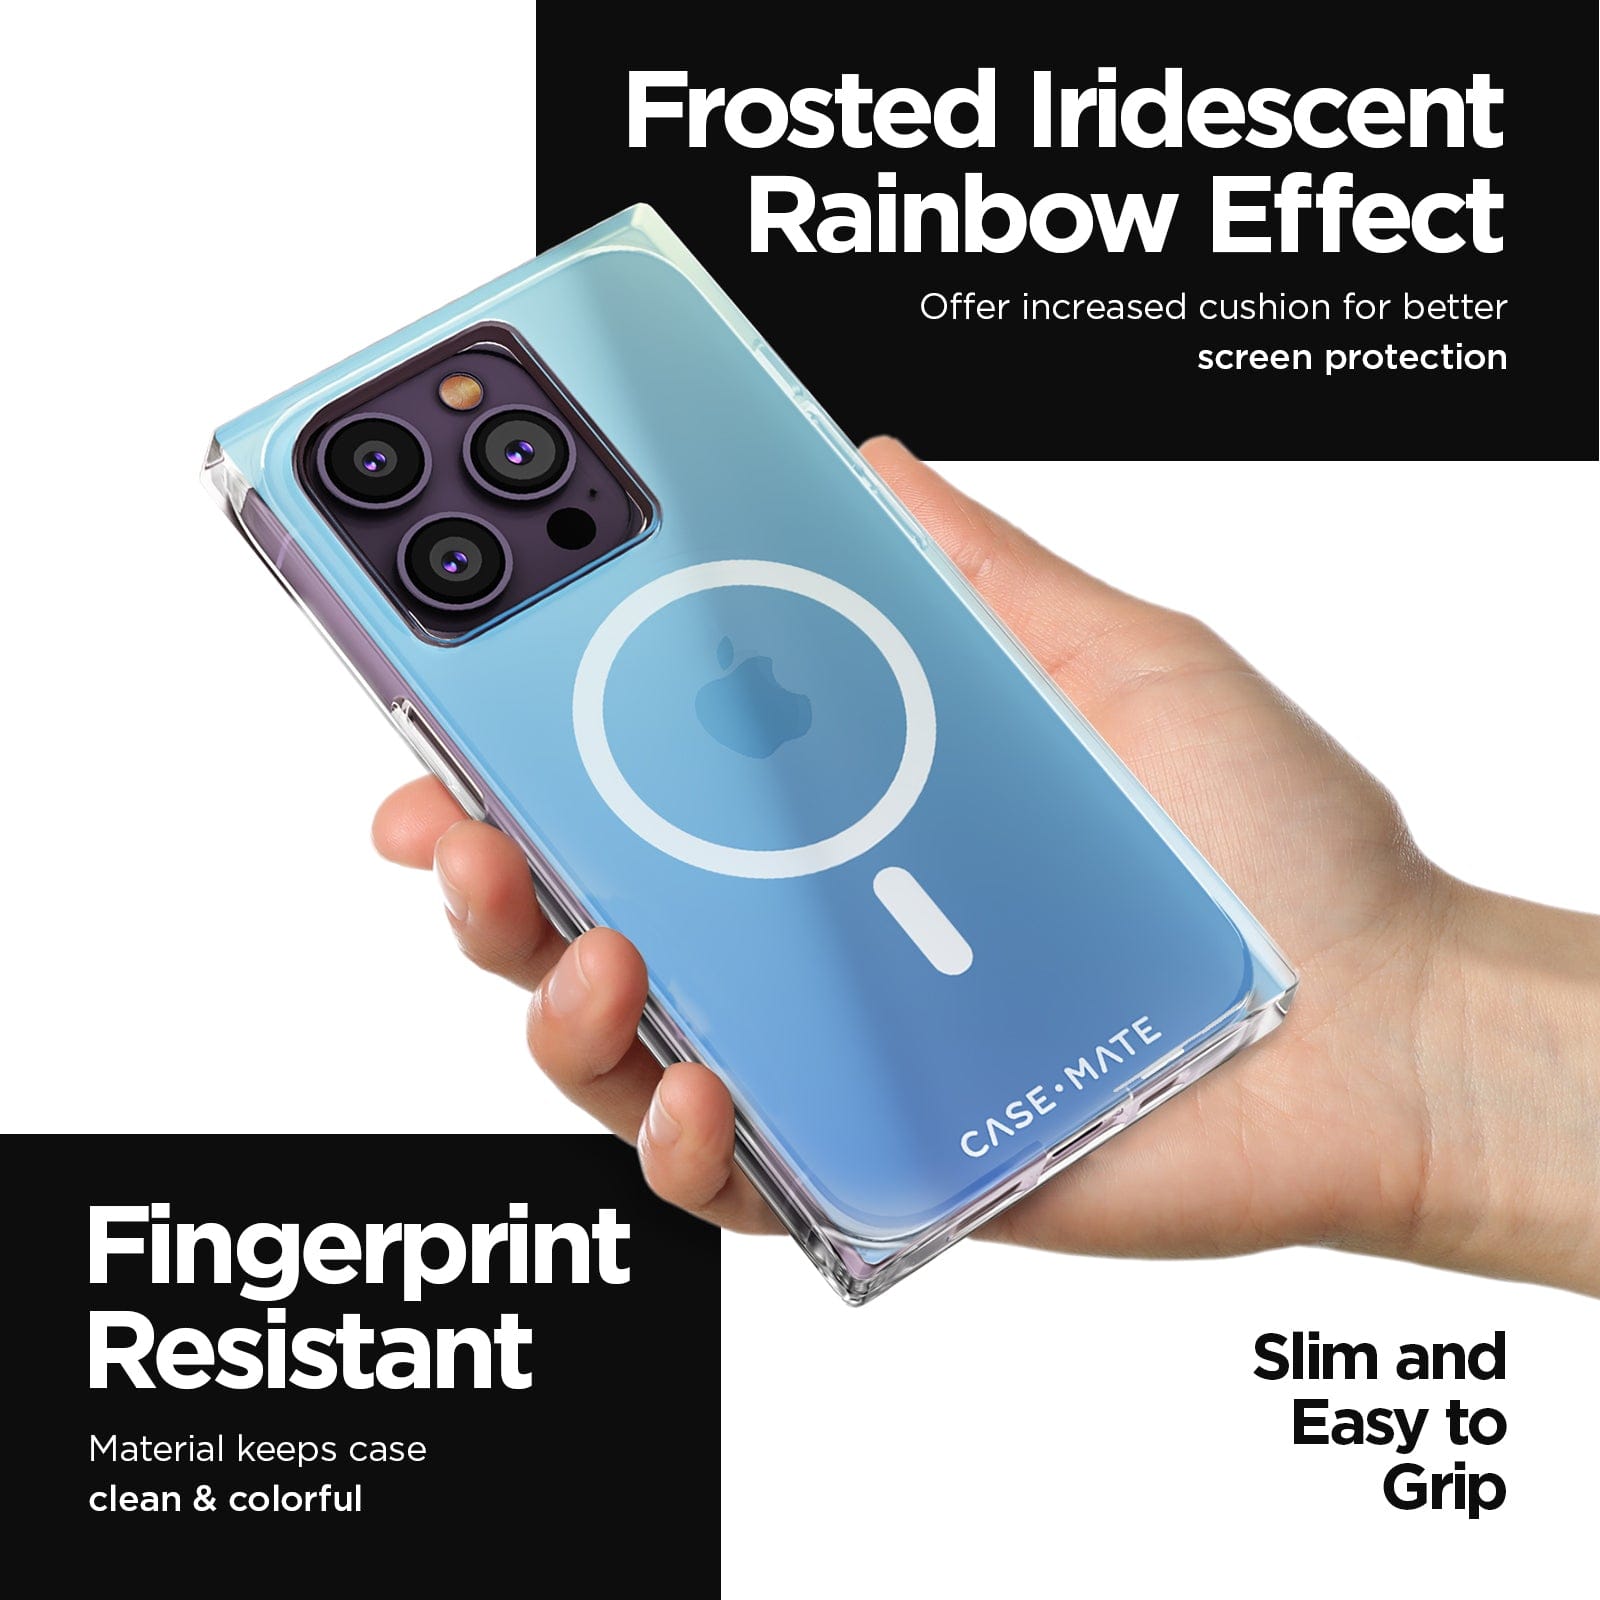 FROSTED IRIDESCENT RAINBOW EFFECT. OFFER INCREASED CUSHION FOR BETTER SCREEN PROTECTION. FINGERPRINT RESISTANT MATERIAL KEEPS CASE CLEAN & COLORFUL. SLIM & EASY TO GRIP. 